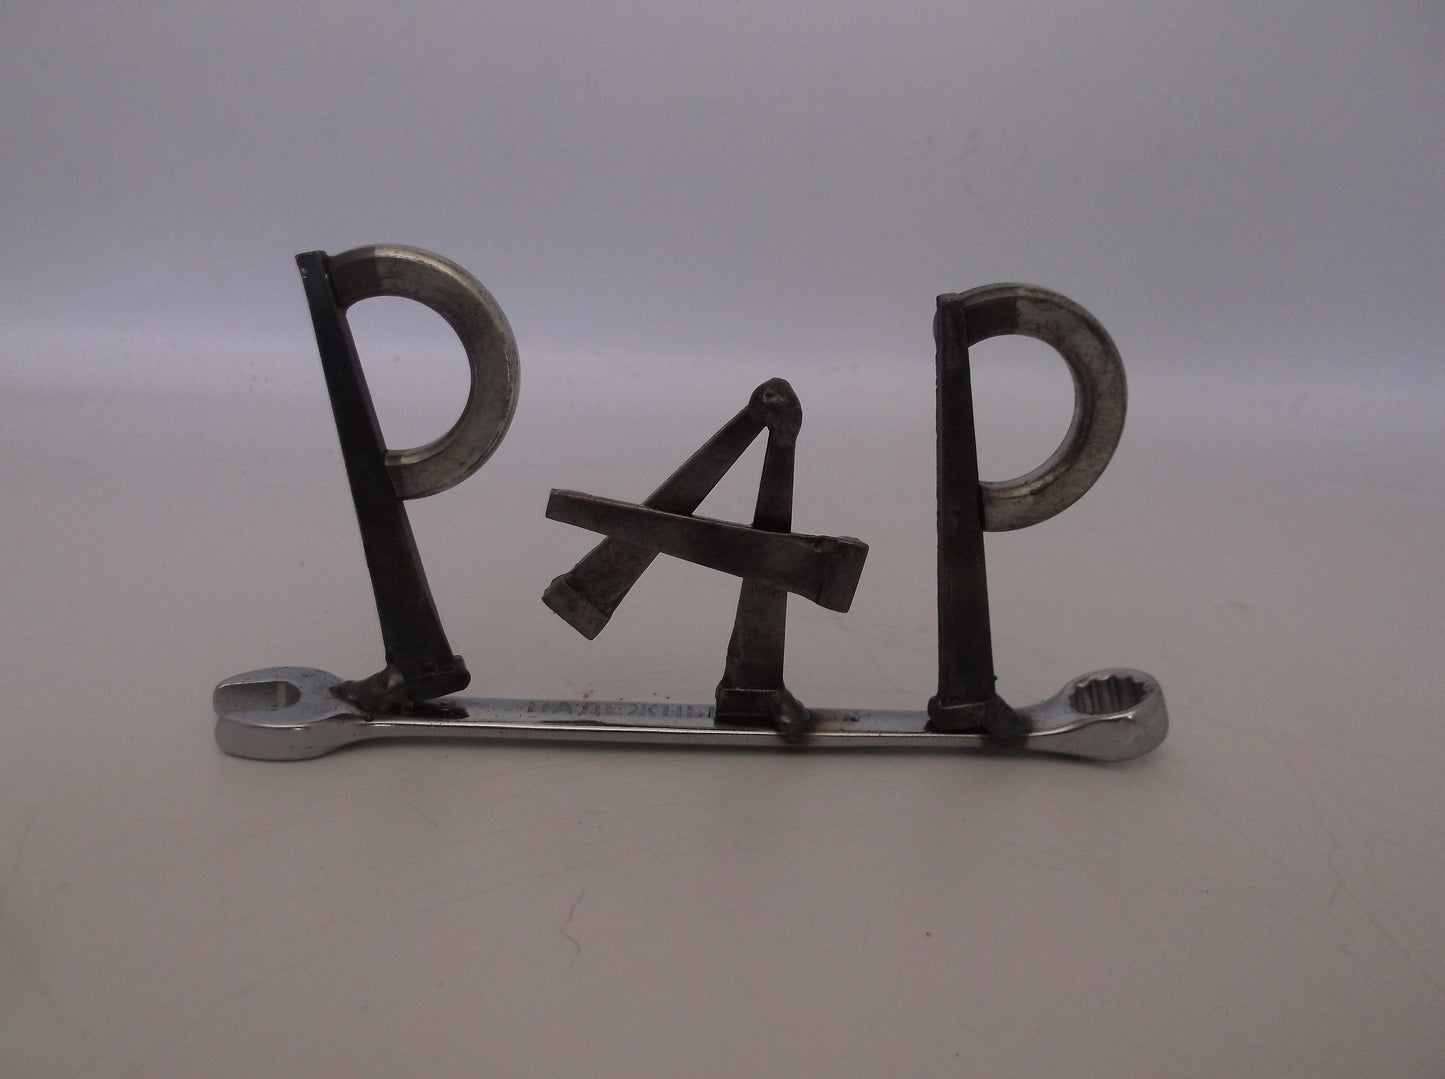 Pap, Fathers Day, tiny wrench, miniature welded metal art